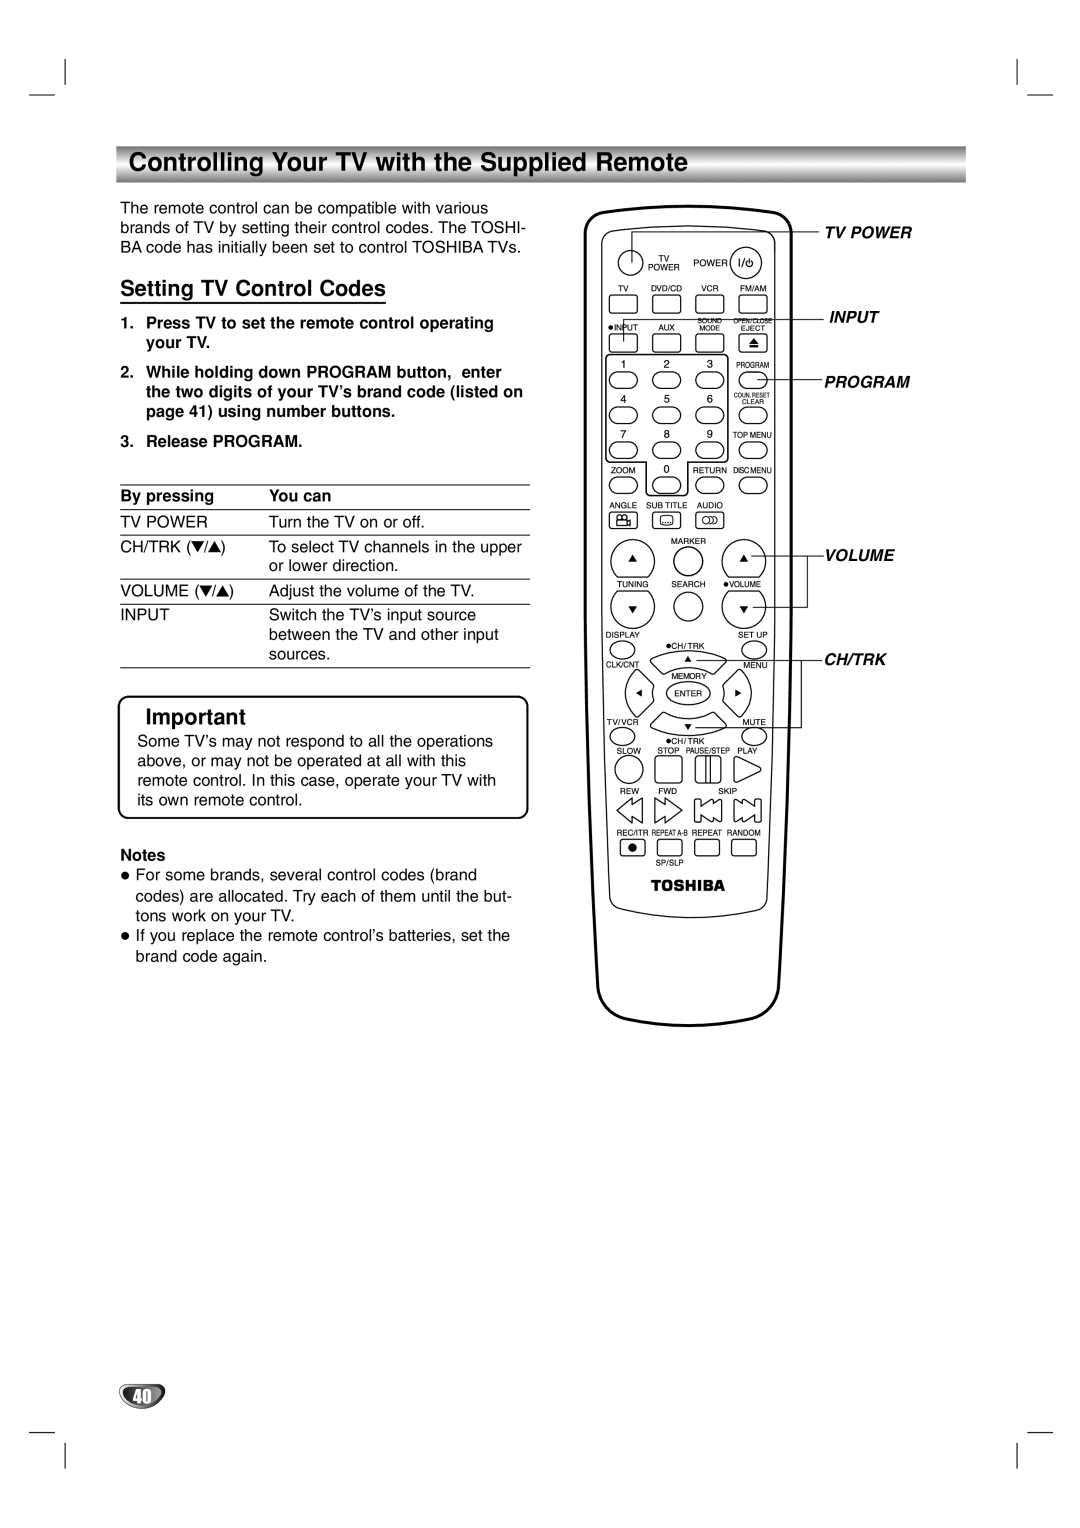 Toshiba SD-V57HTSU owner manual Controlling Your TV with the Supplied Remote, Setting TV Control Codes 